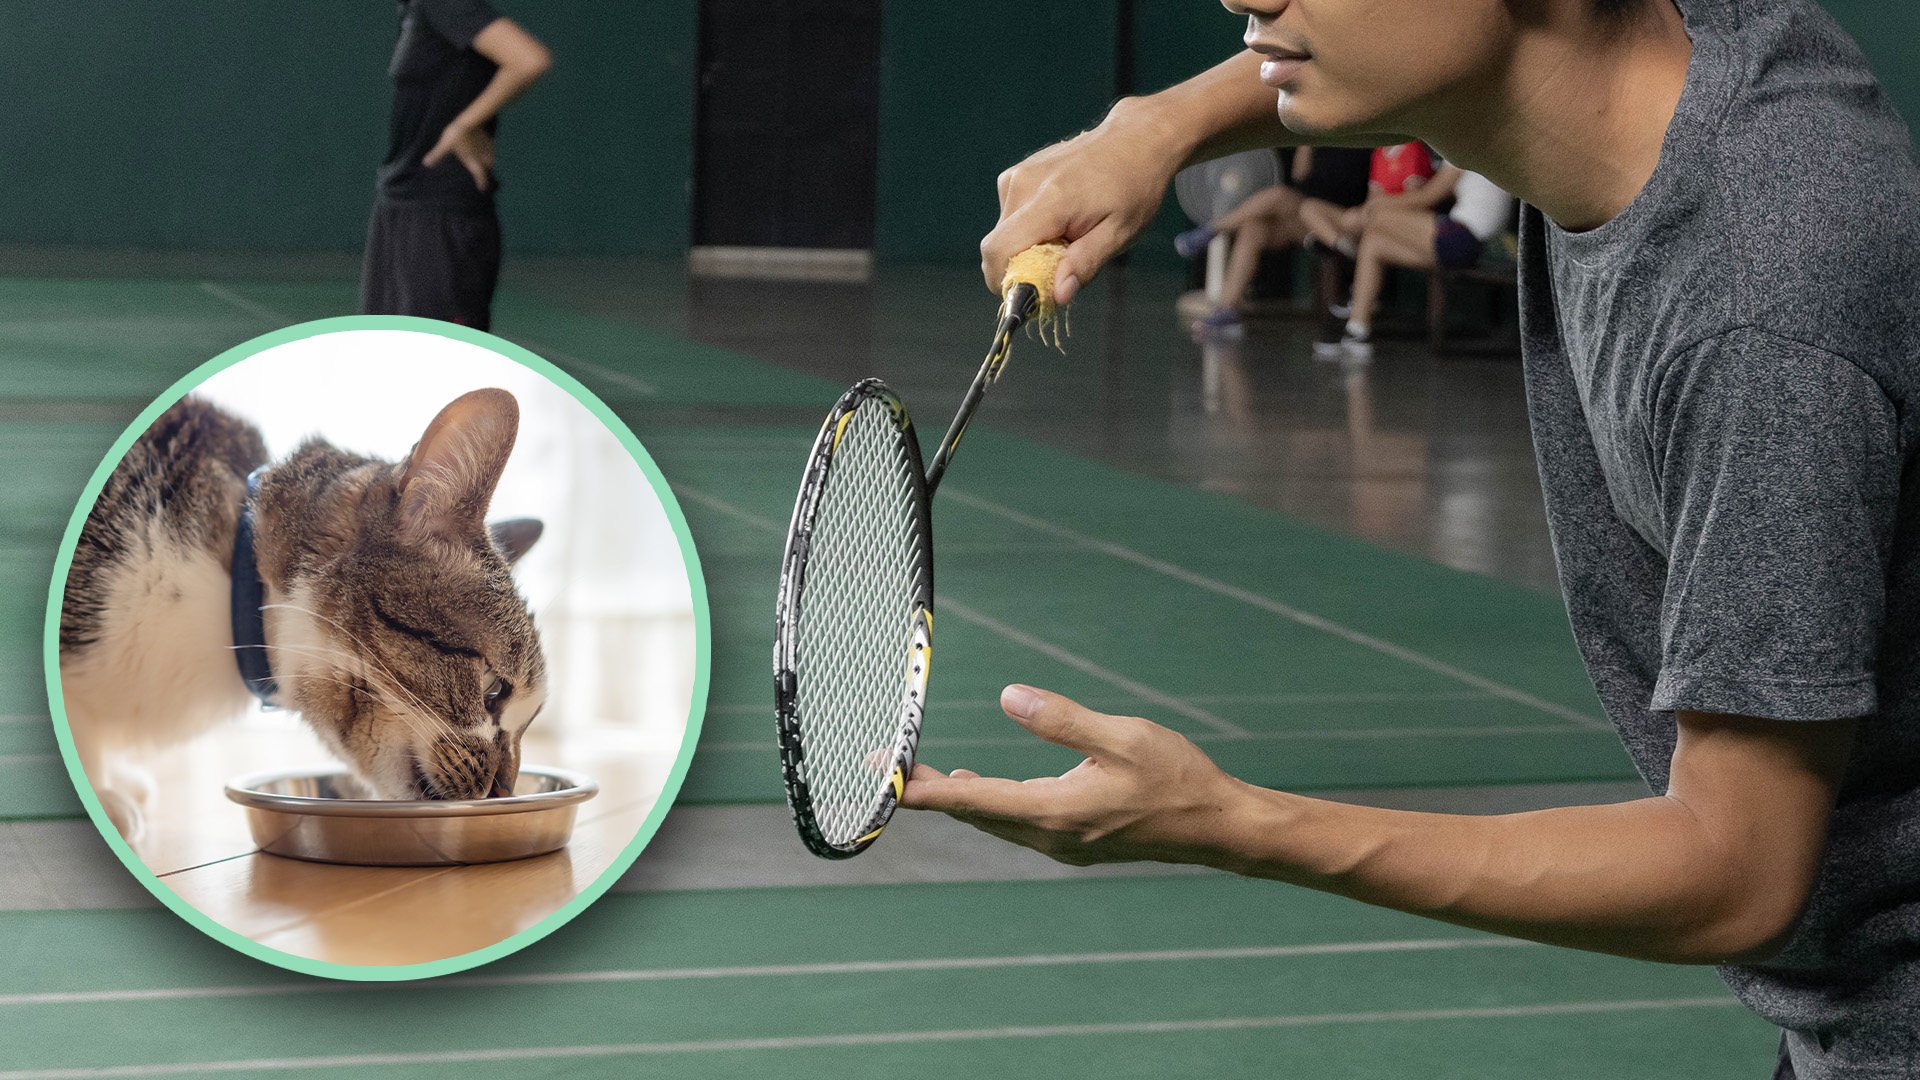 A court in China has ordered a man who fed a stray cat in a stadium to pay compensation after the feline caused a badminton player to trip up and injure himself badly during a game. Photo: SCMP composite/Shutterstock